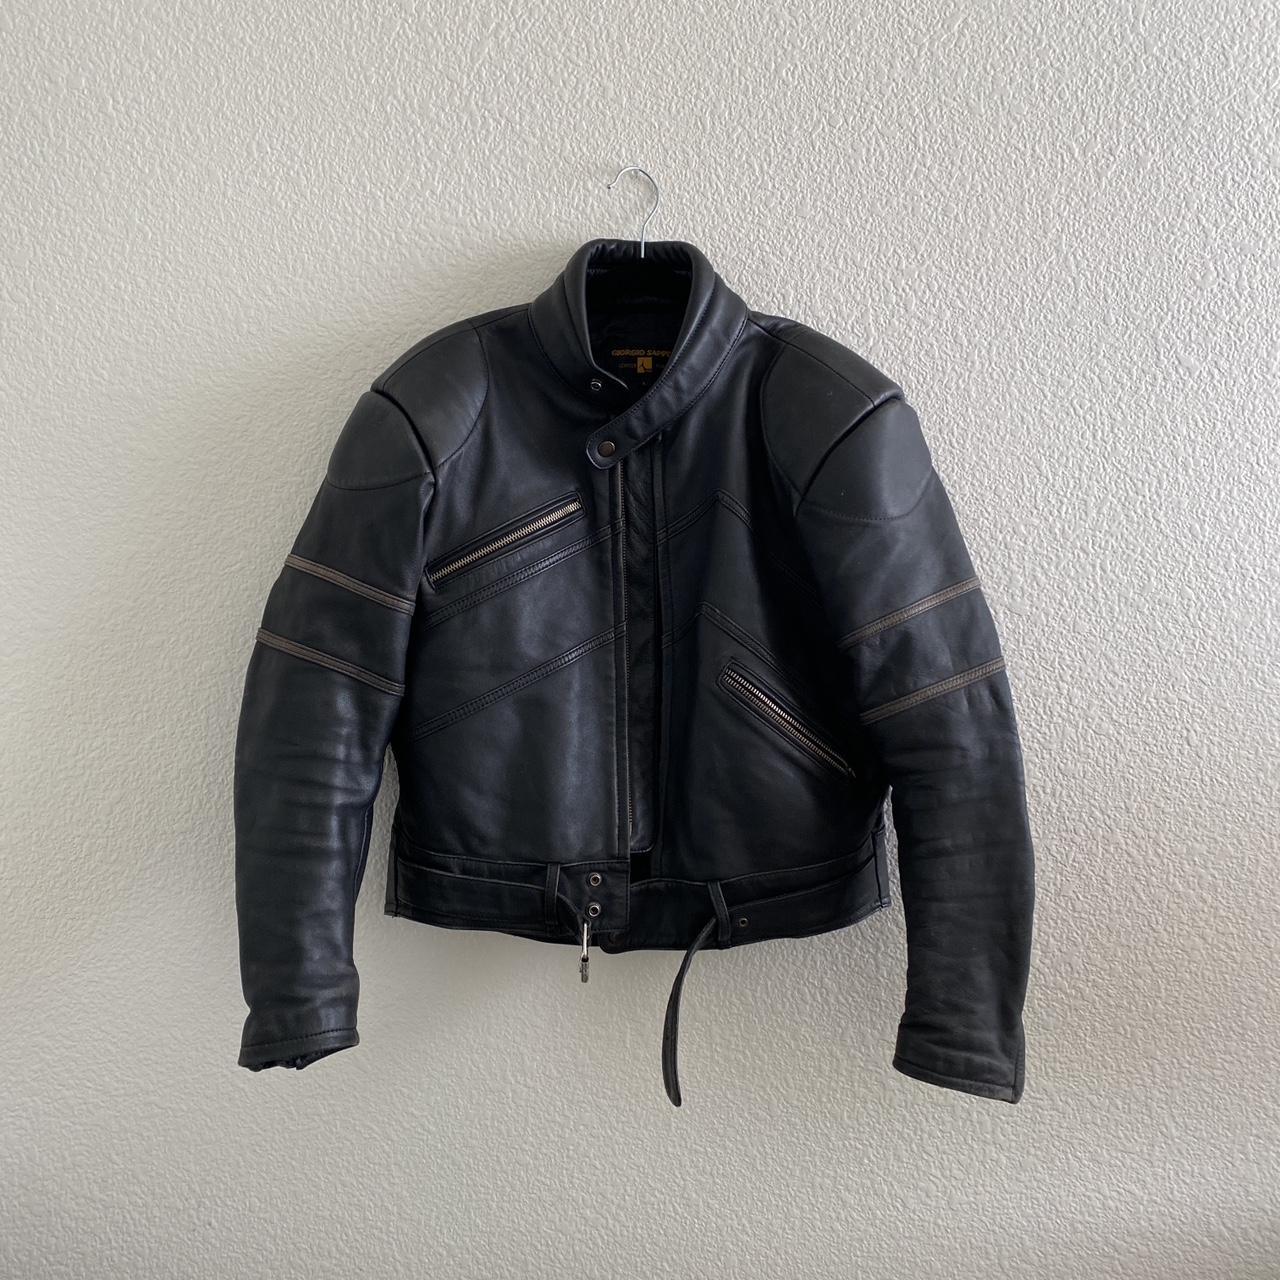 Leather Motorcycle Jacket Nice fitting leather... - Depop